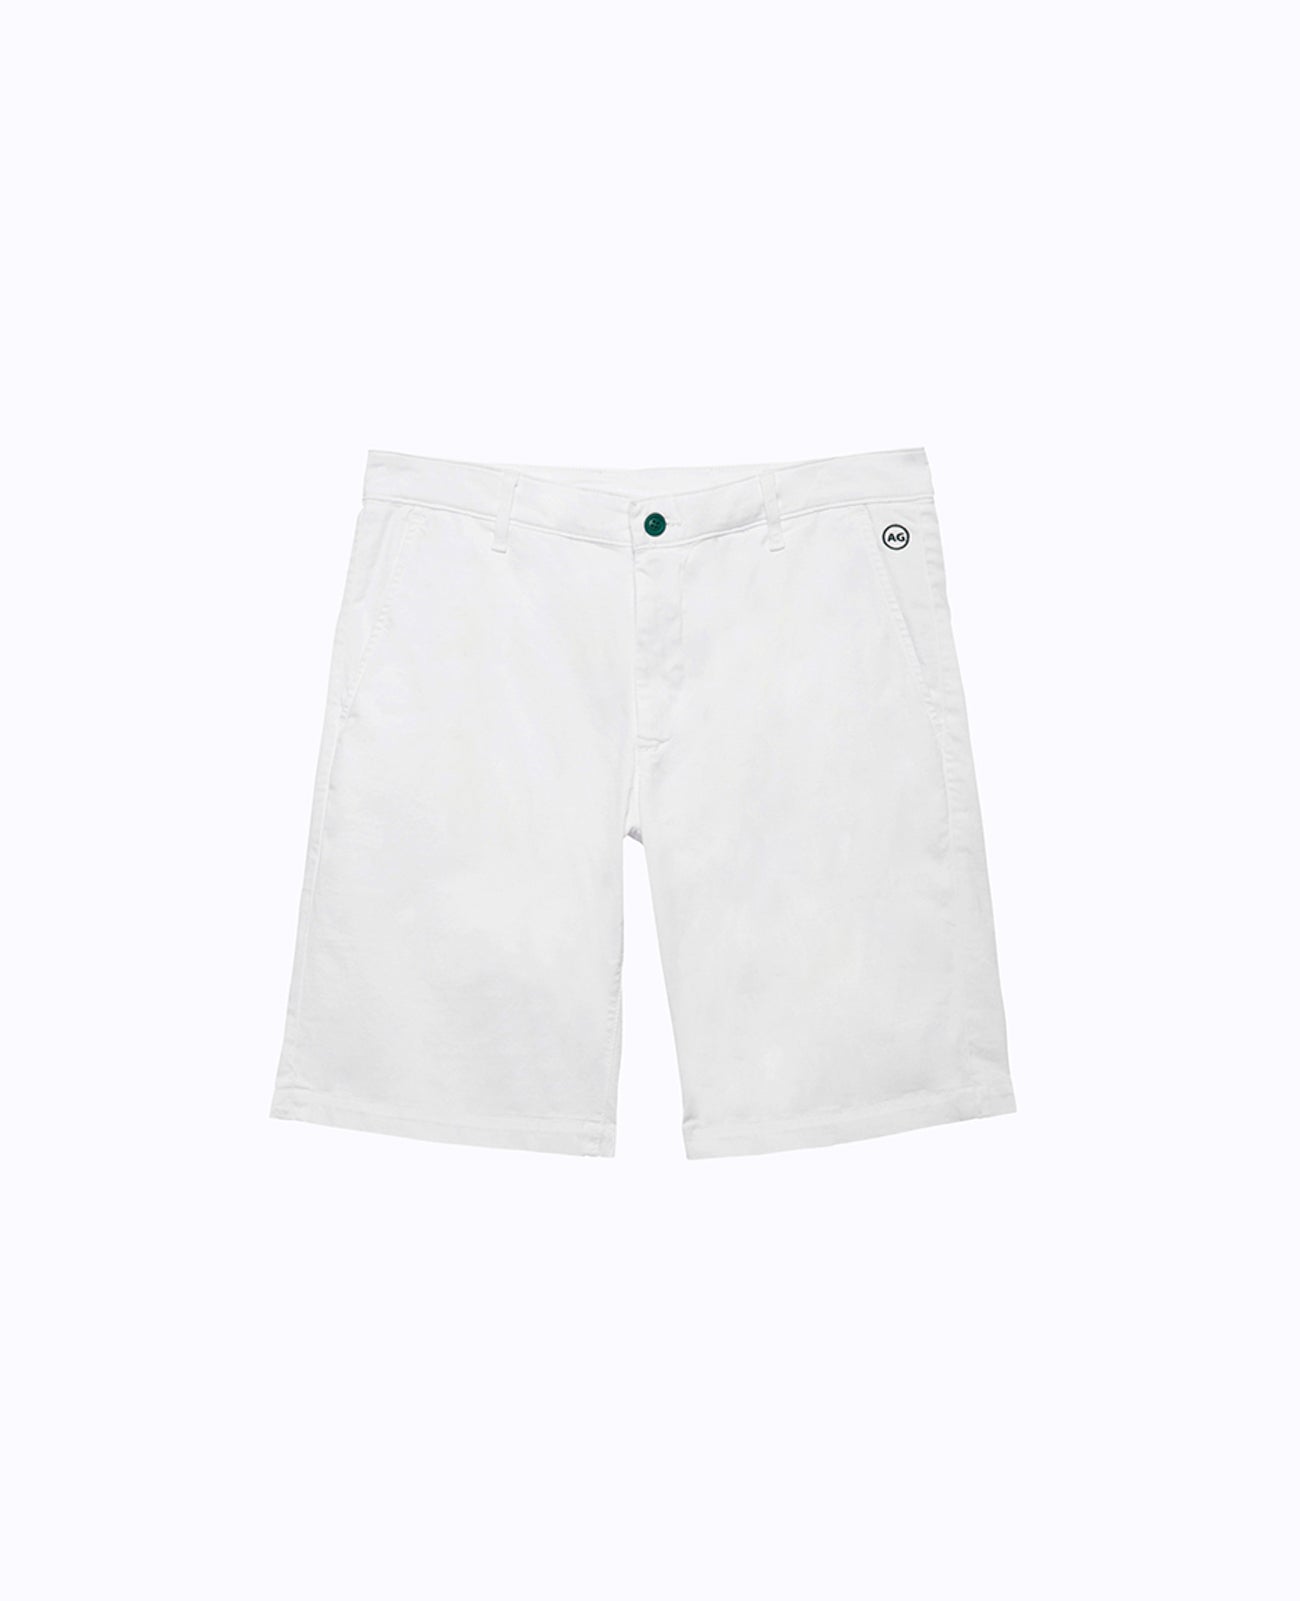 Canyon Short Bright White Green Label Collection Men Bottoms Photo 6